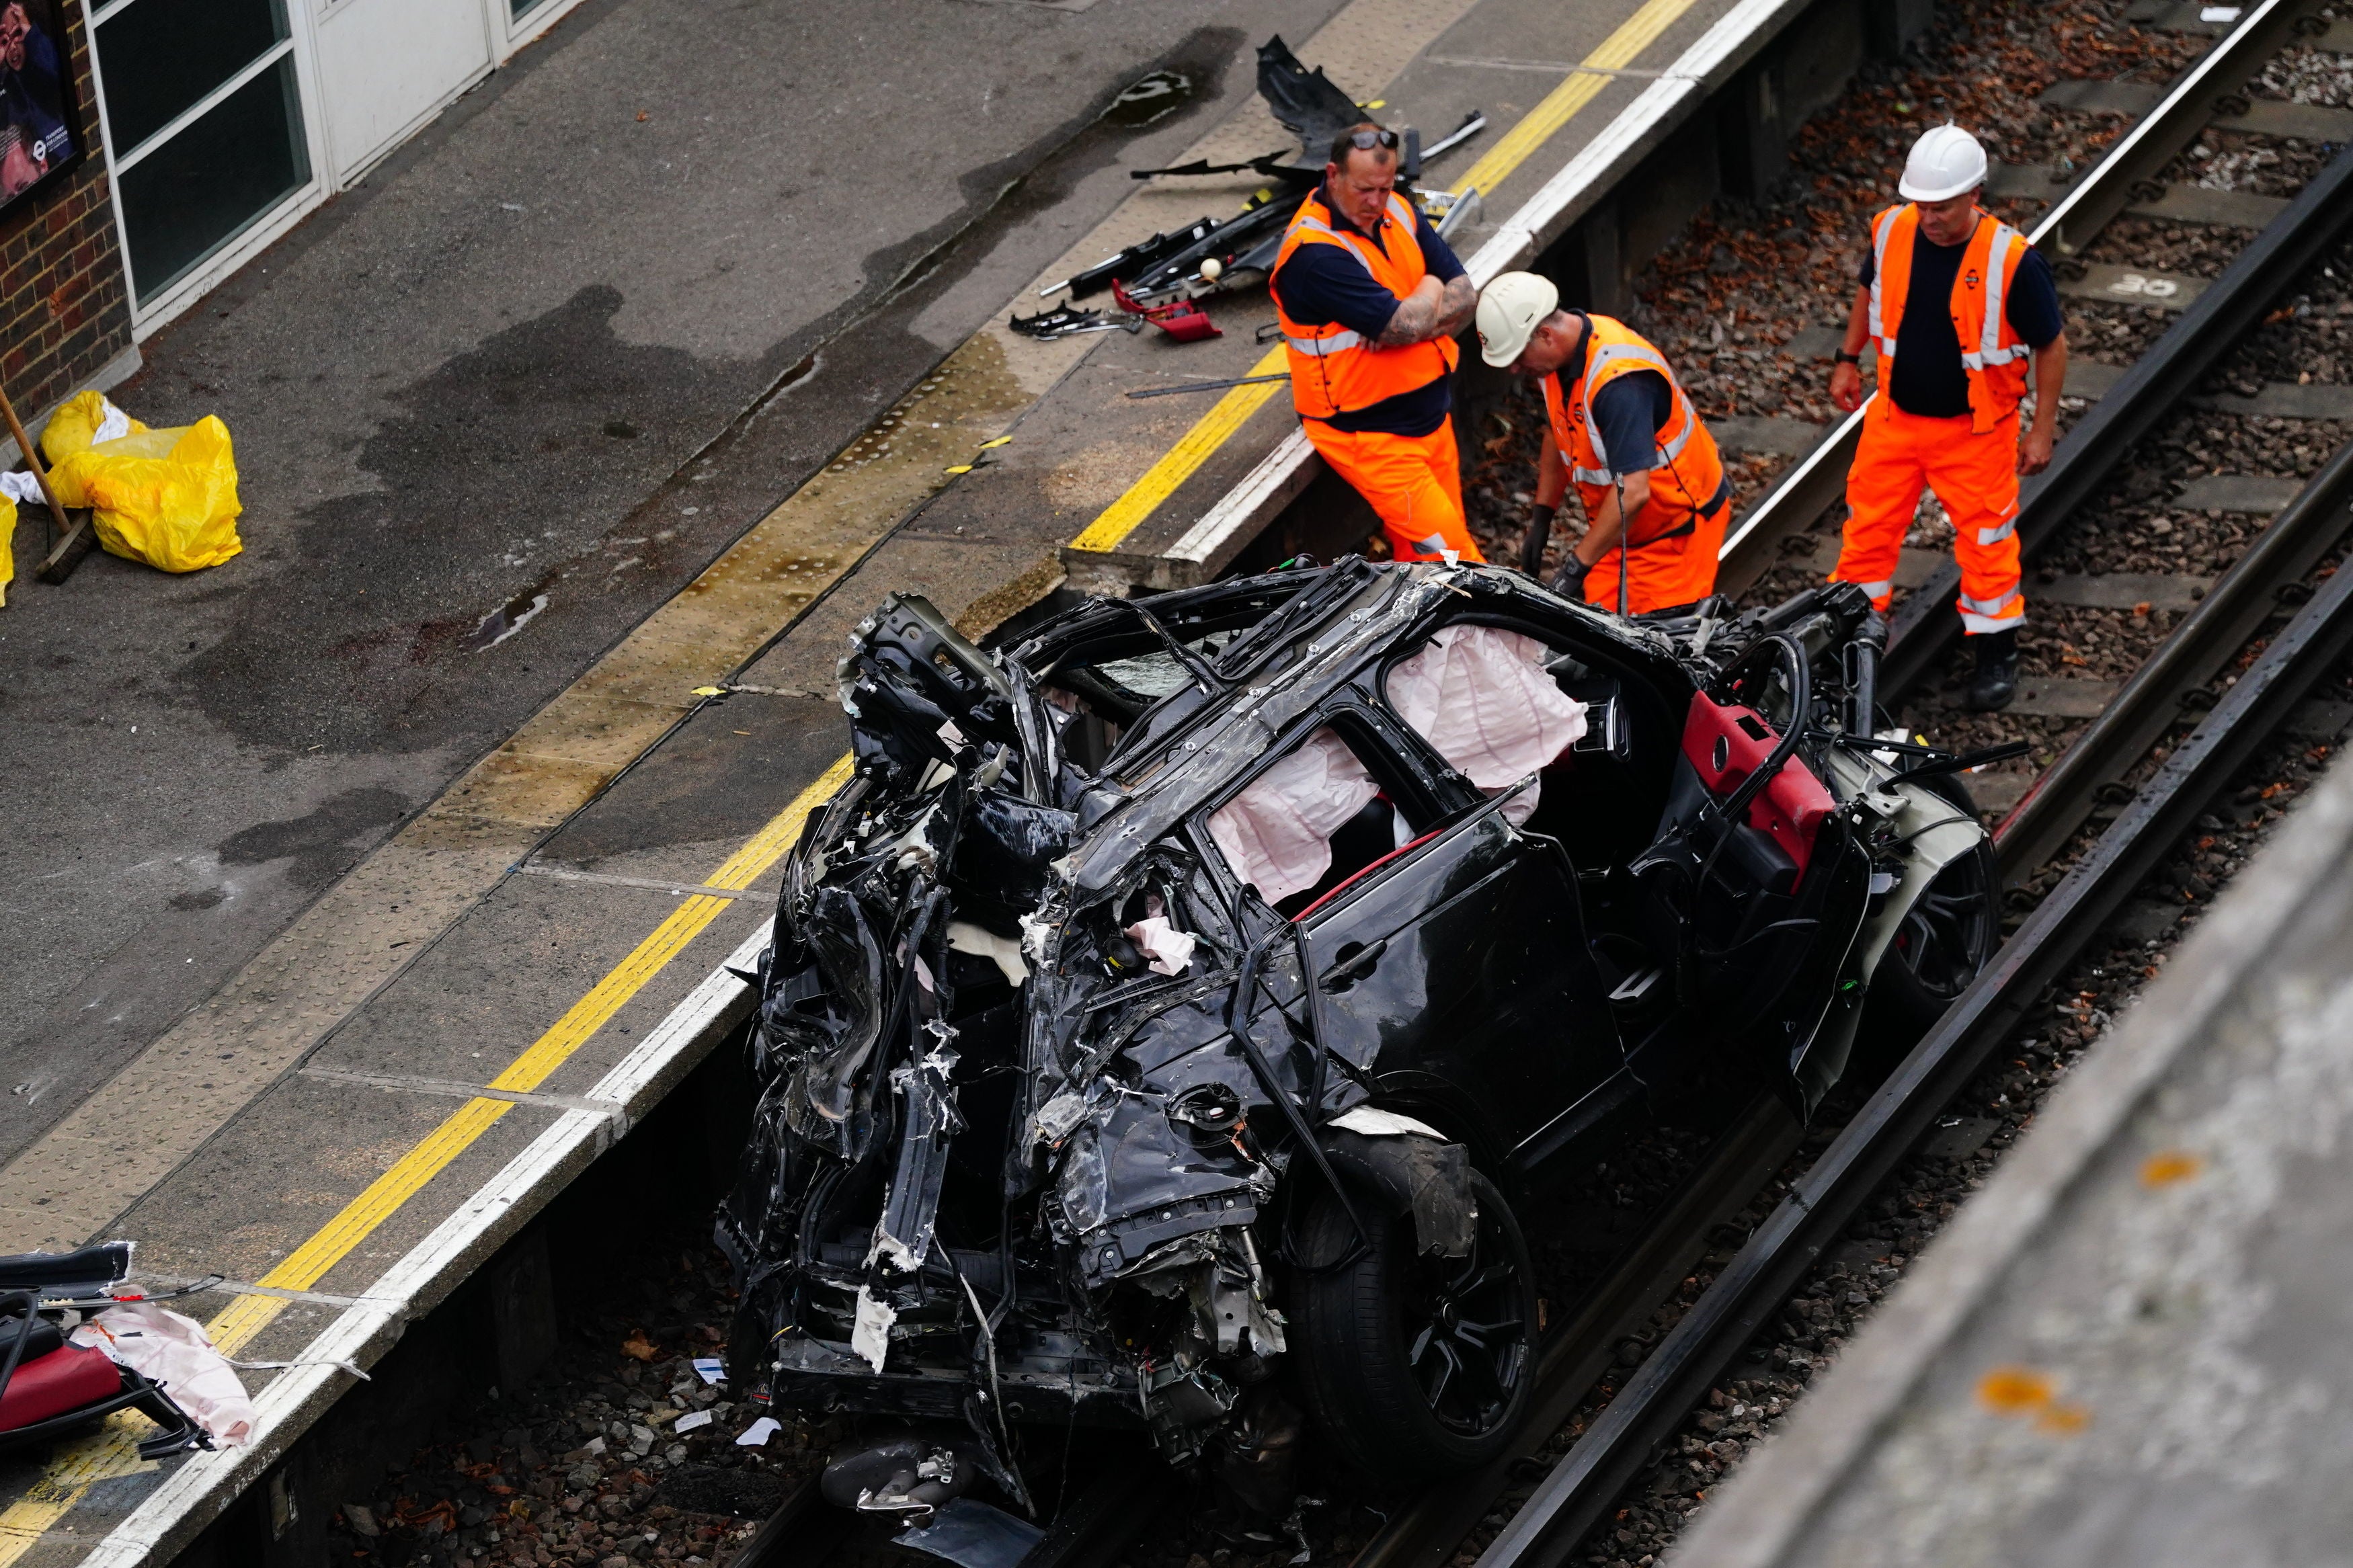 A Range Rover ended up on the railway tracks of the Piccadilly line at Park Royal underground station